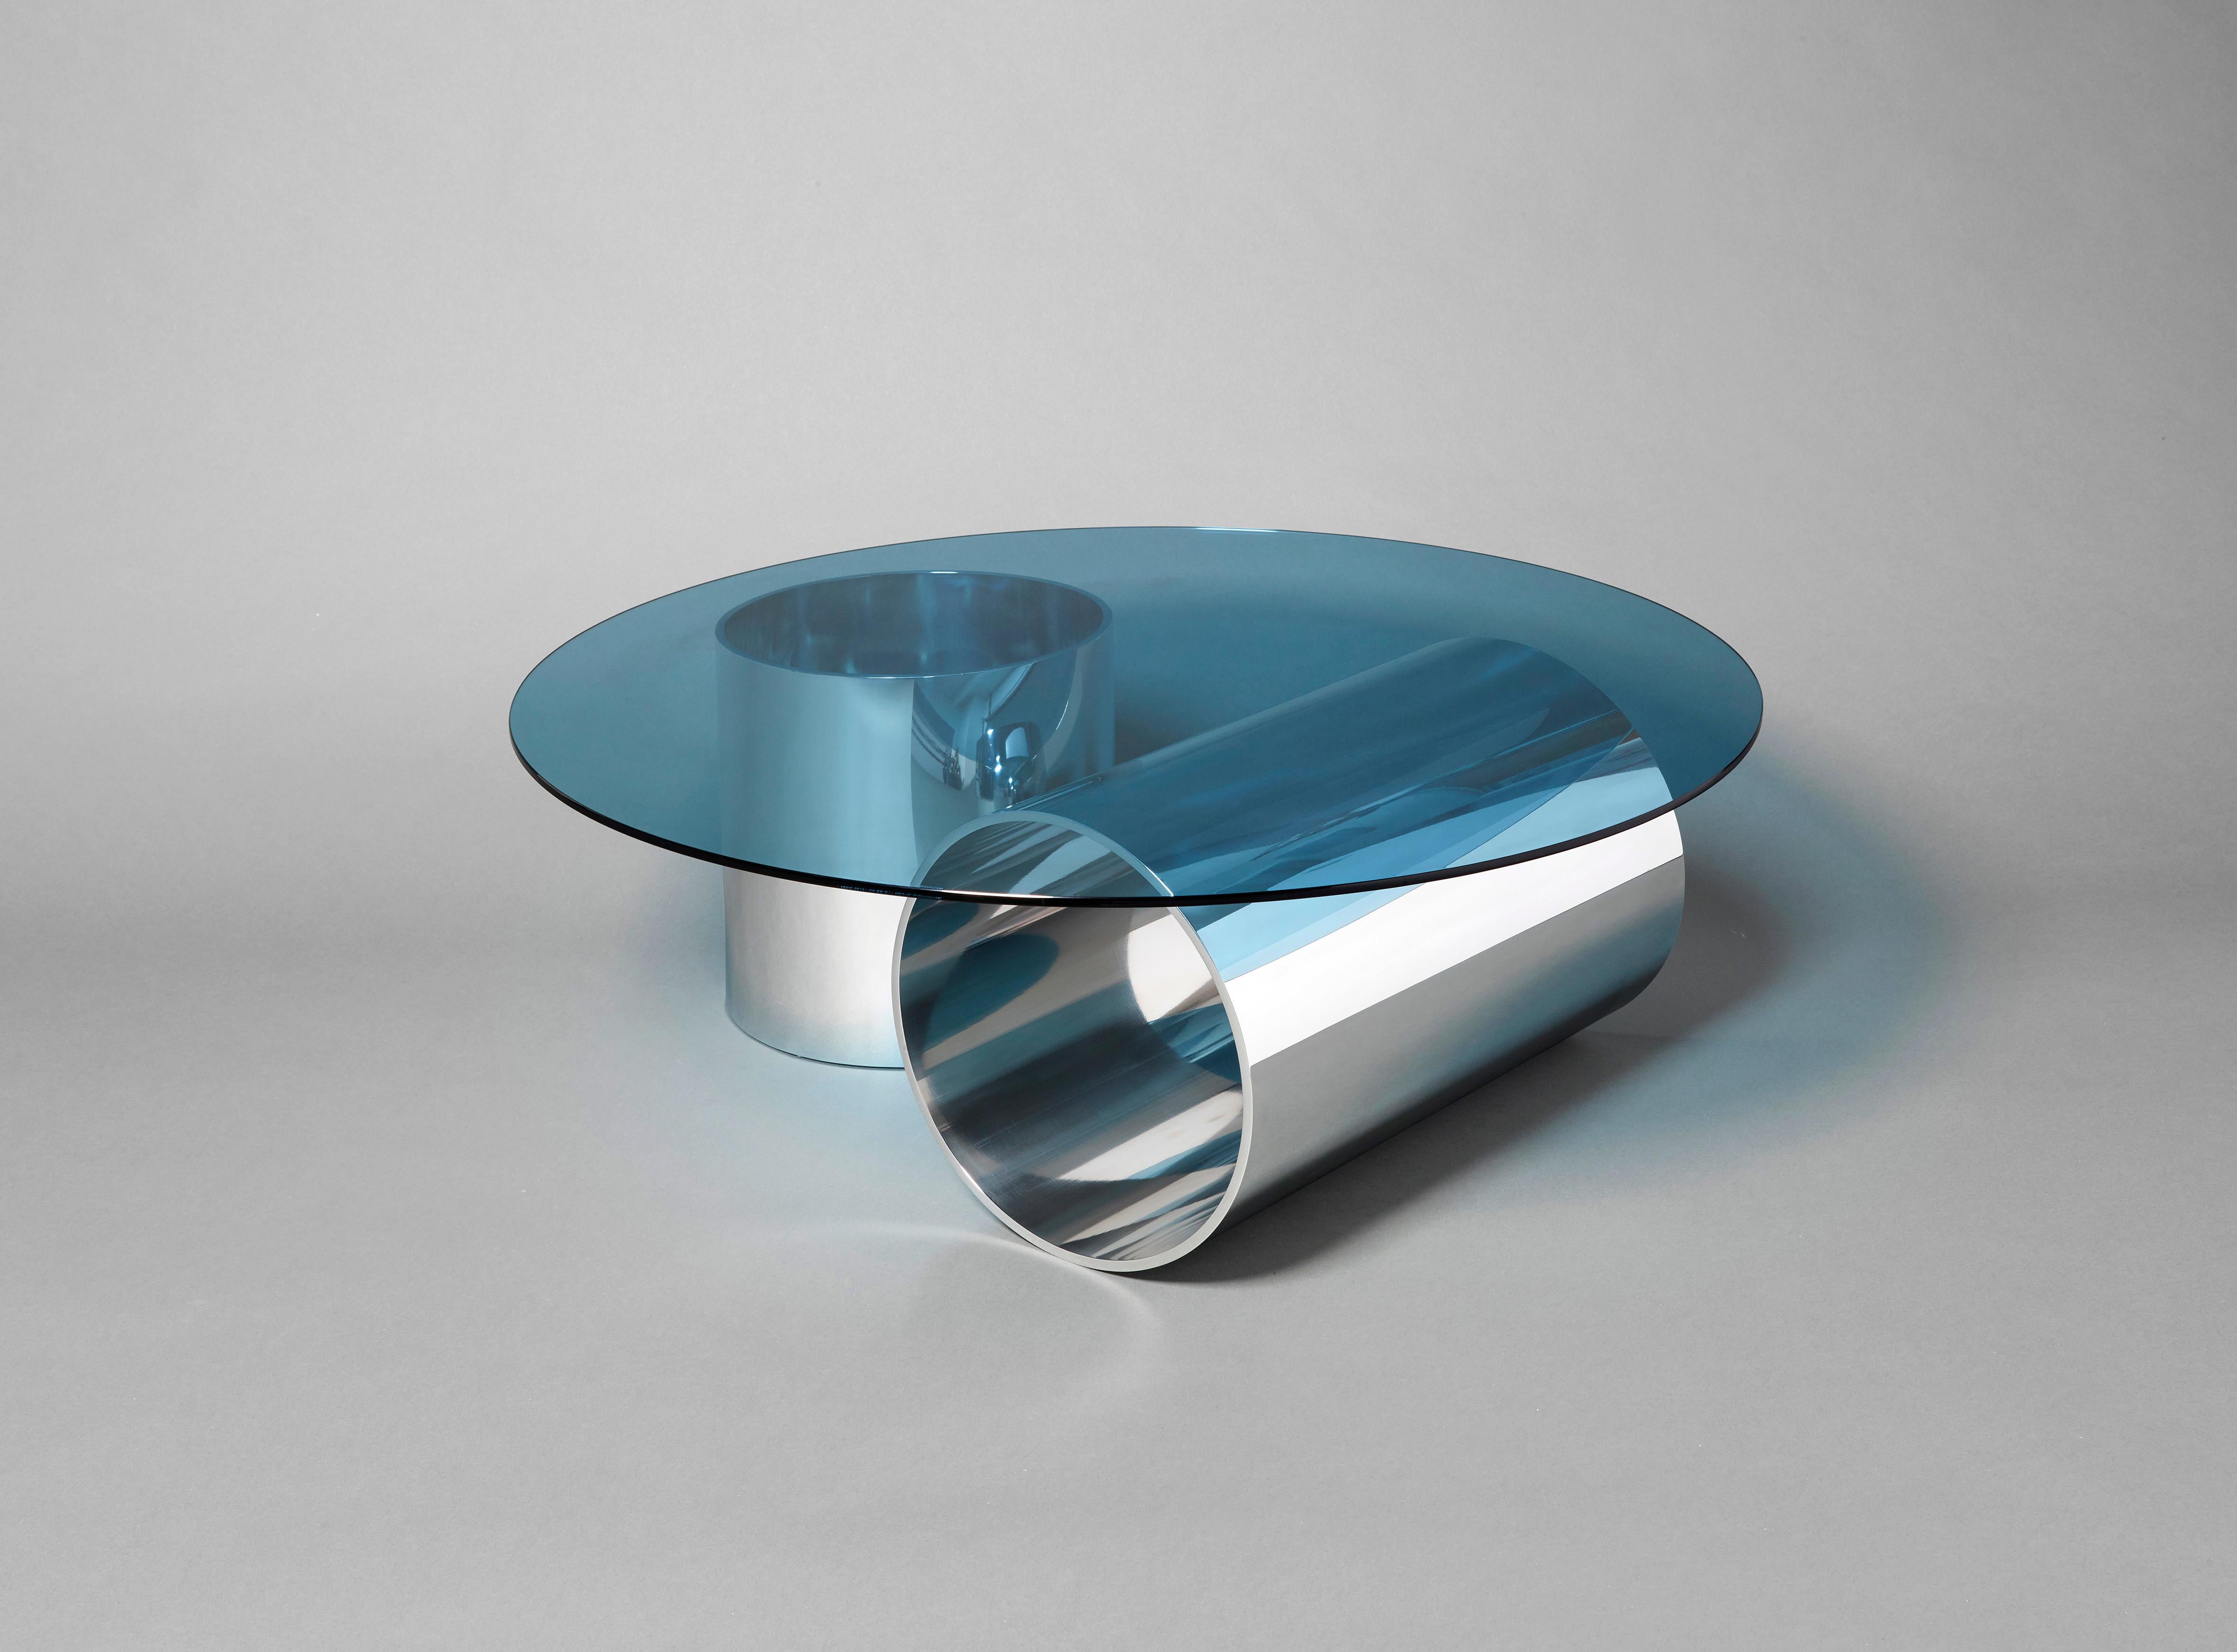 'MMPM' Tubular polished aluminium and blue tinted glass coffee table.

This design further explores the designers obsession with tubular metal and graphical form. Still in his trademark minimal style, these tables are crafted in hand-polished